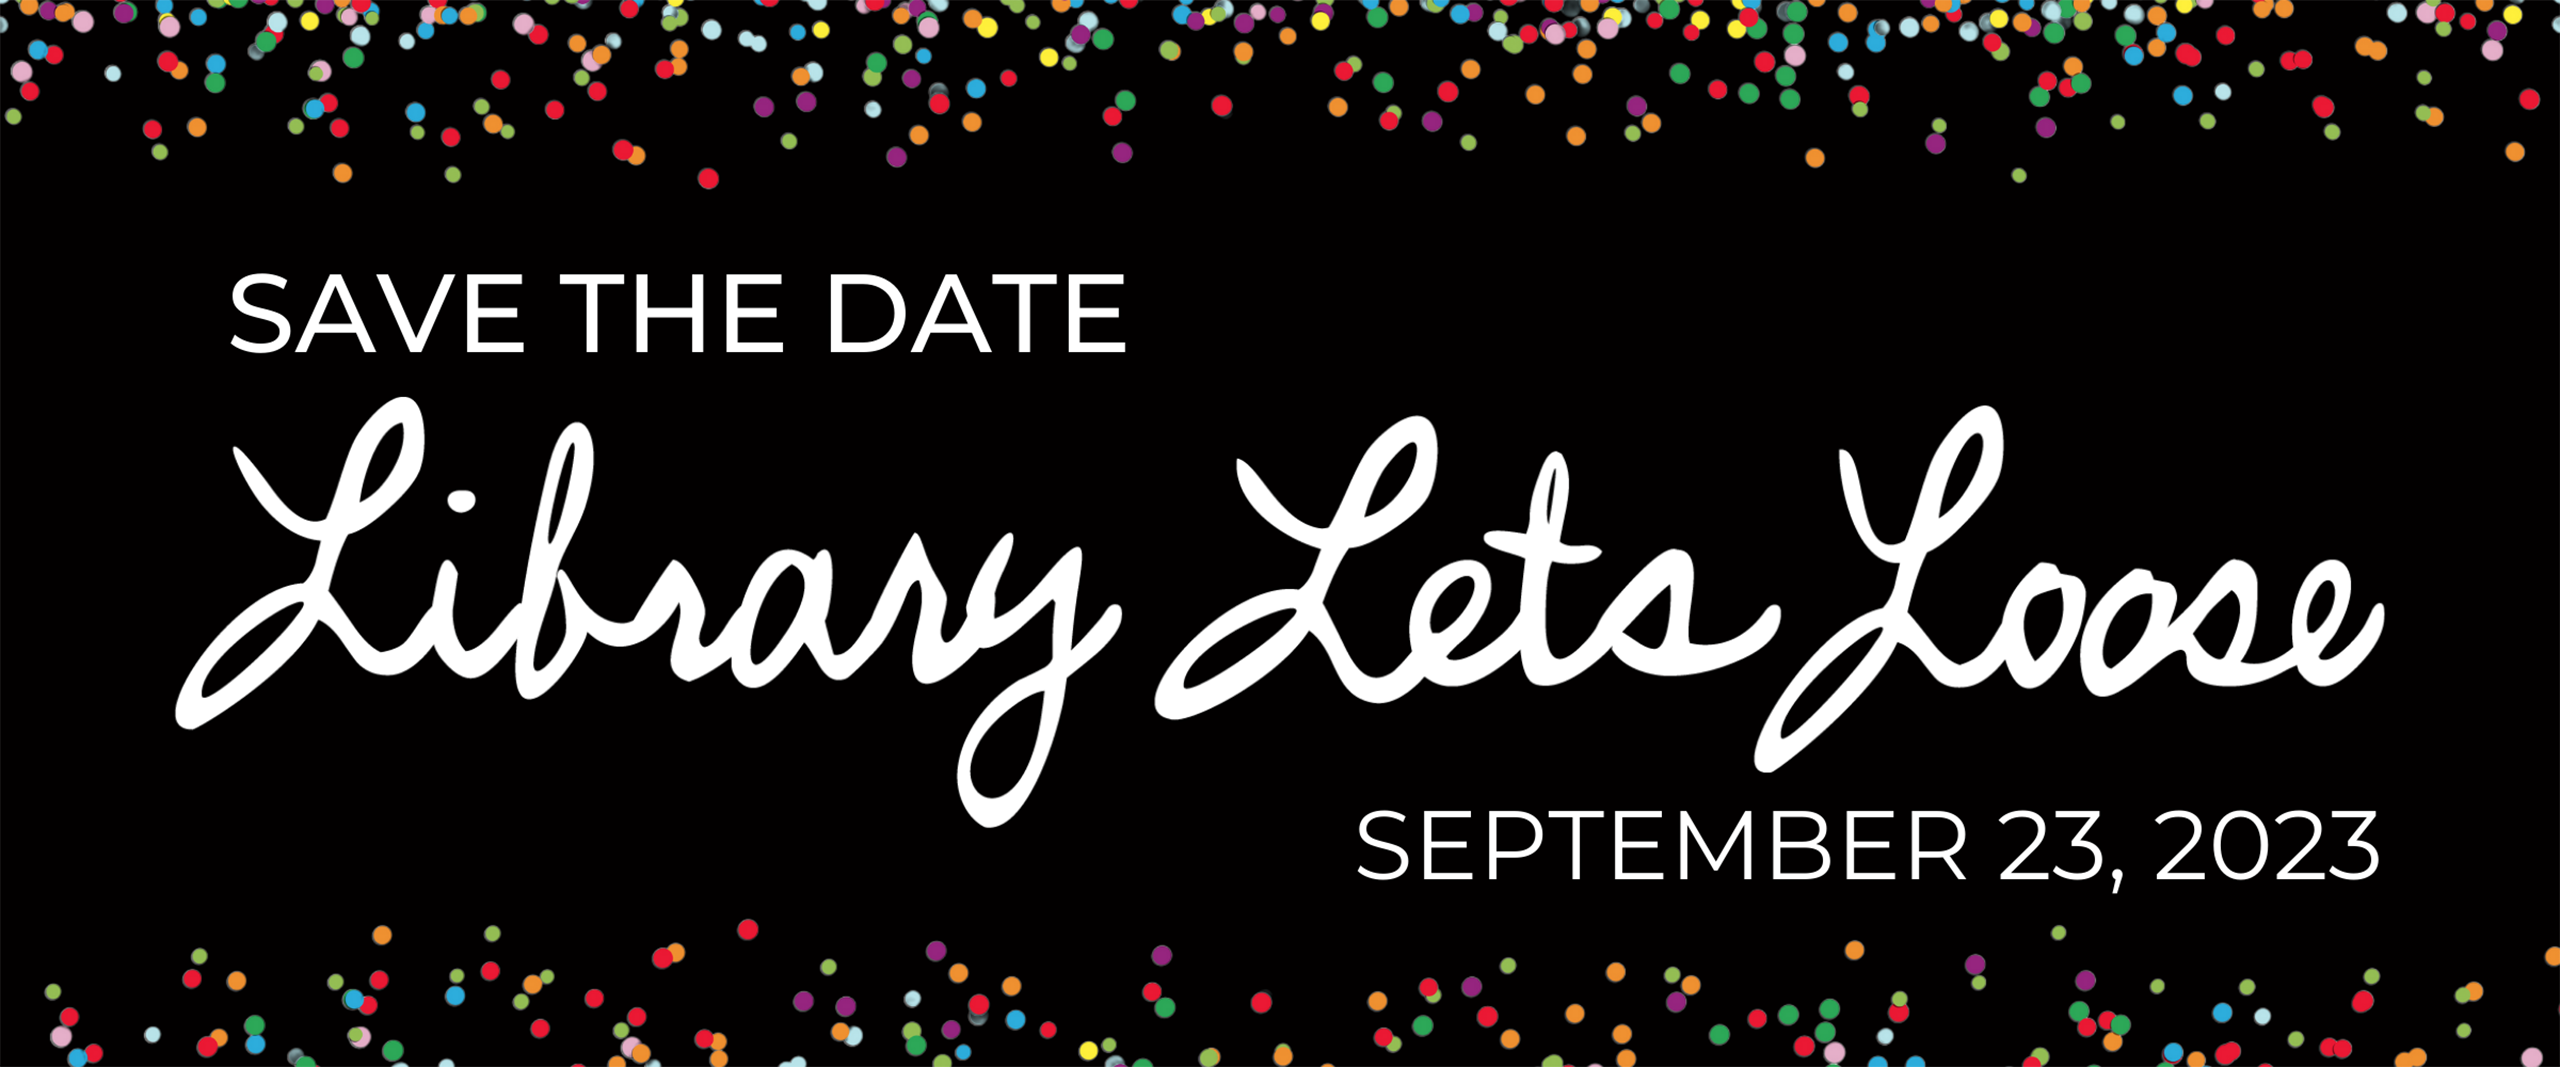 Save the Date for Library Lets Loose on September 23, 2023.